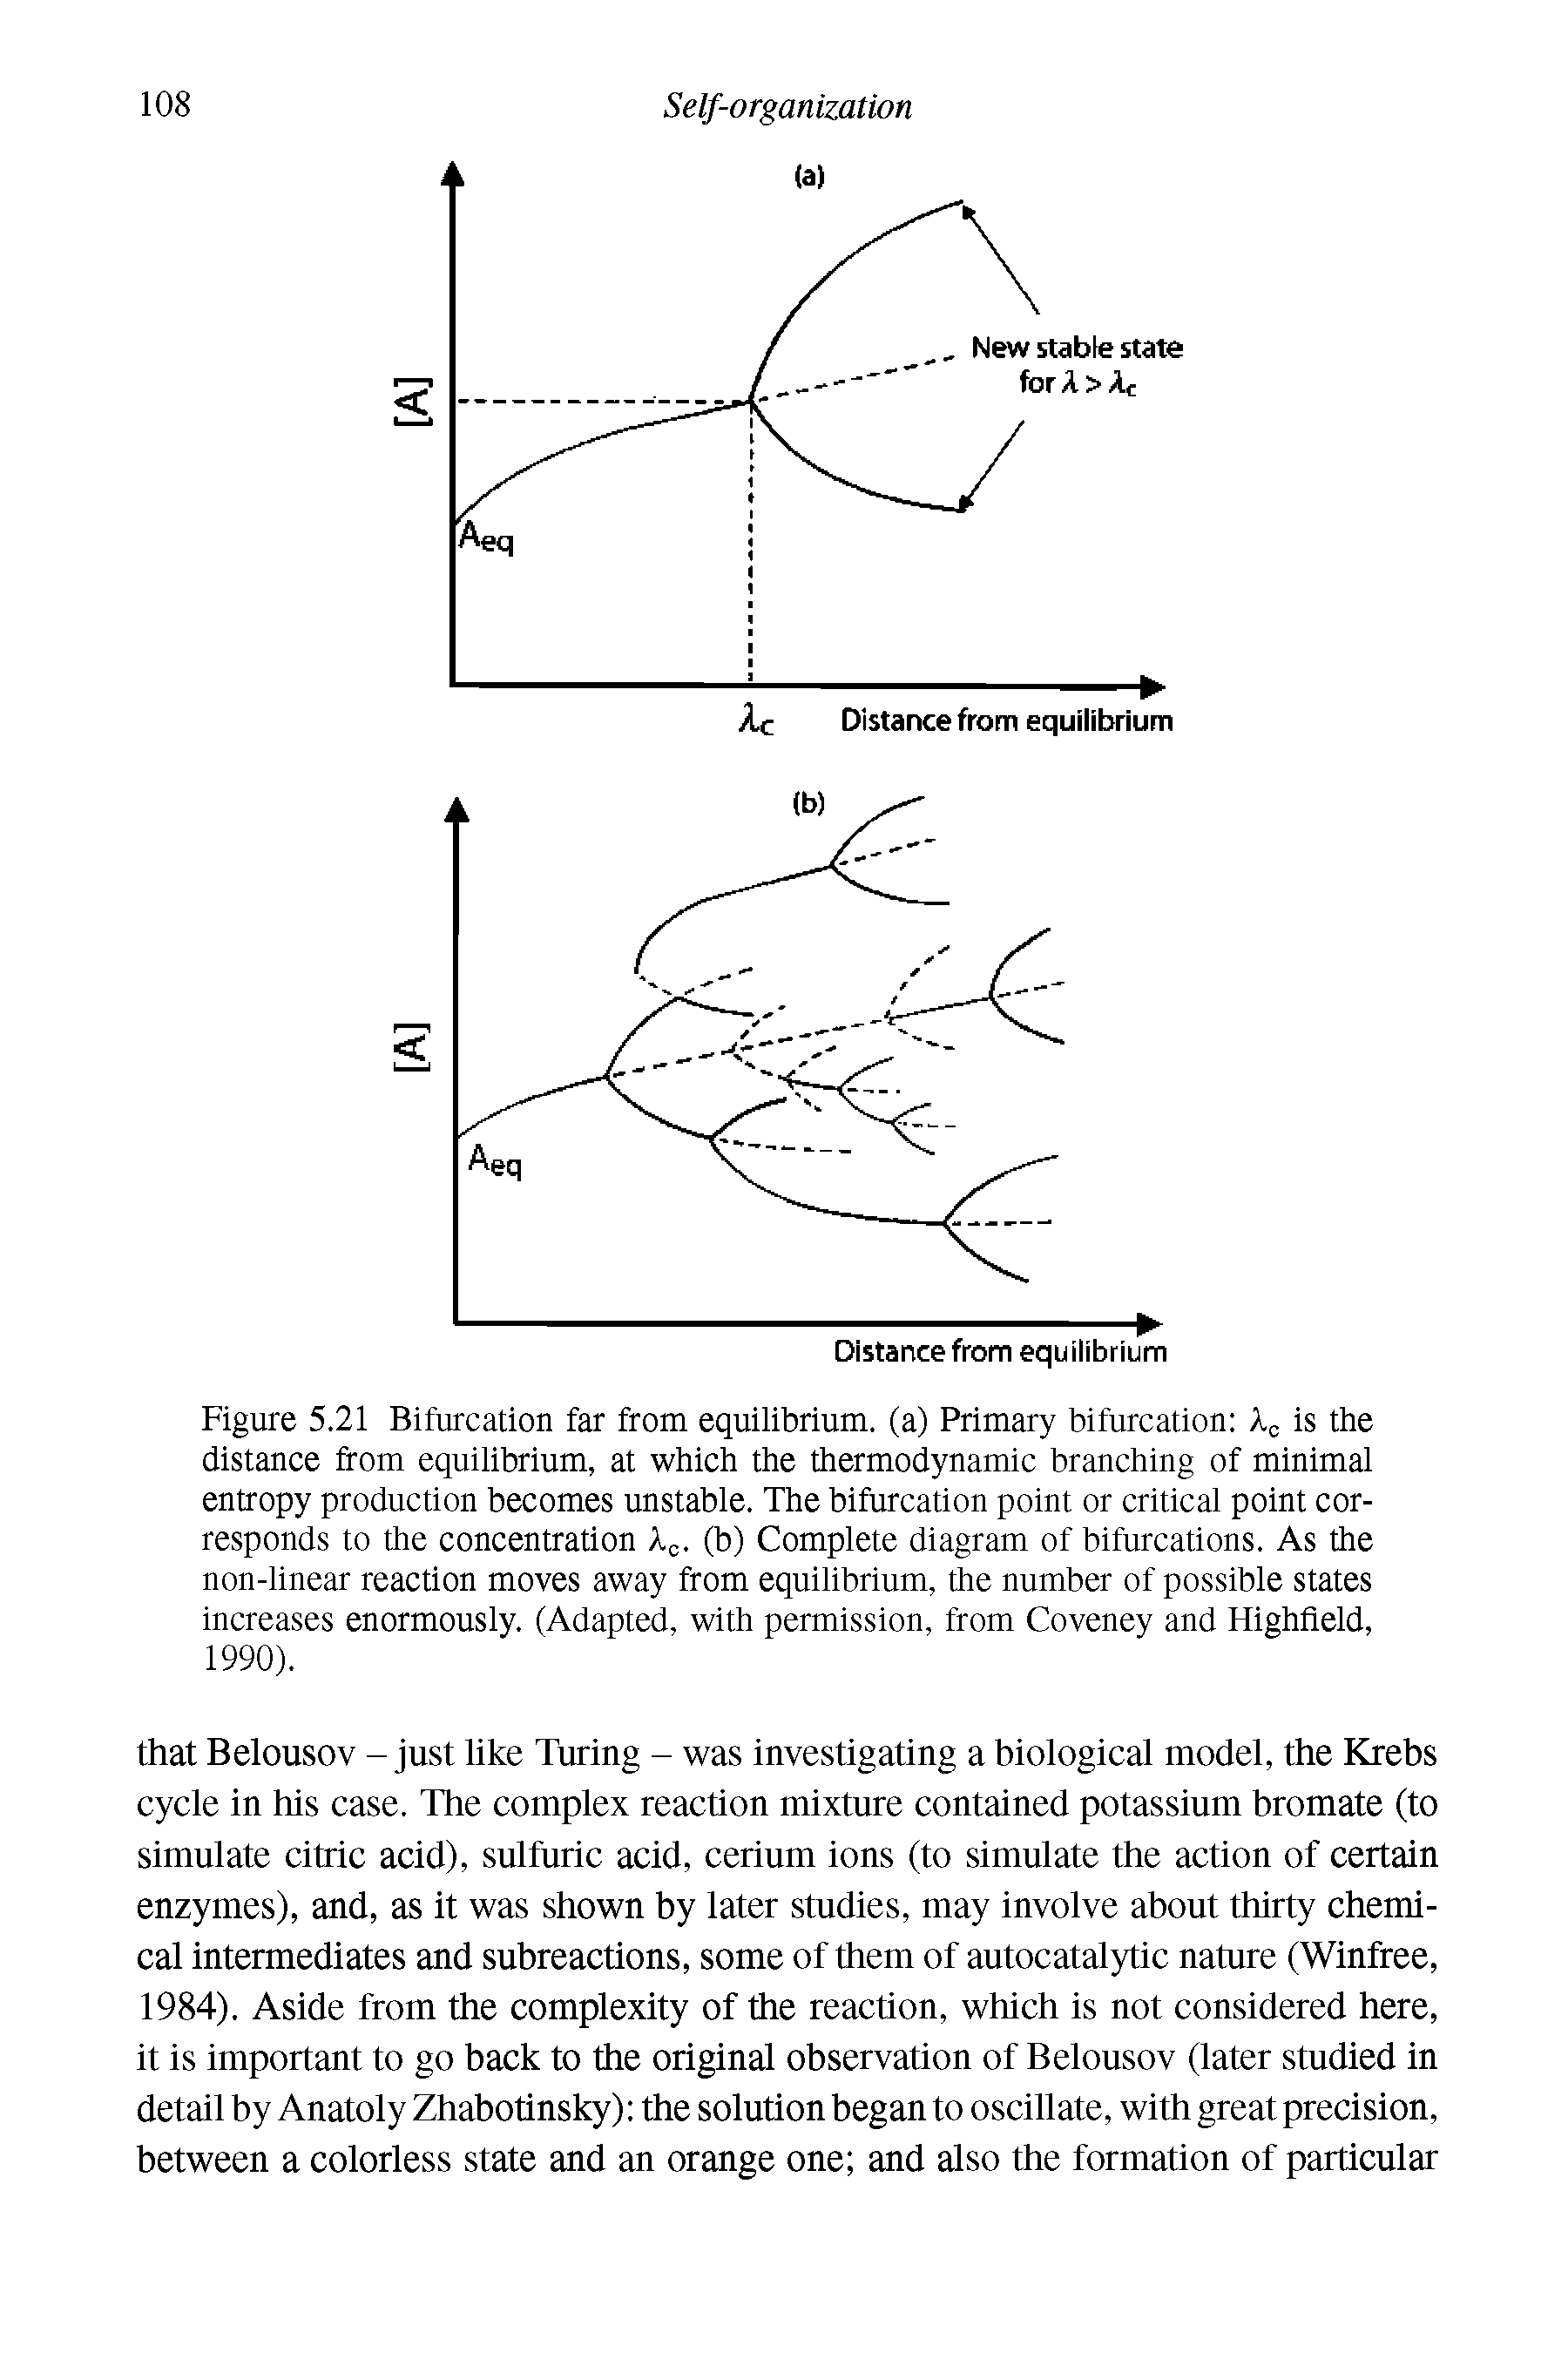 Figure 5.21 Bifurcation far from equilibrium, (a) Primary bifurcation is the distance from equilibrium, at which the thermodynamic branching of minimal entropy production becomes unstable. The bifurcation point or critical point corresponds to the concentration (b) Complete diagram of bifurcations. As the non-linear reaction moves away from equilibrium, the number of possible states increases enormously. (Adapted, with permission, from Coveney and Highfield, 1990).